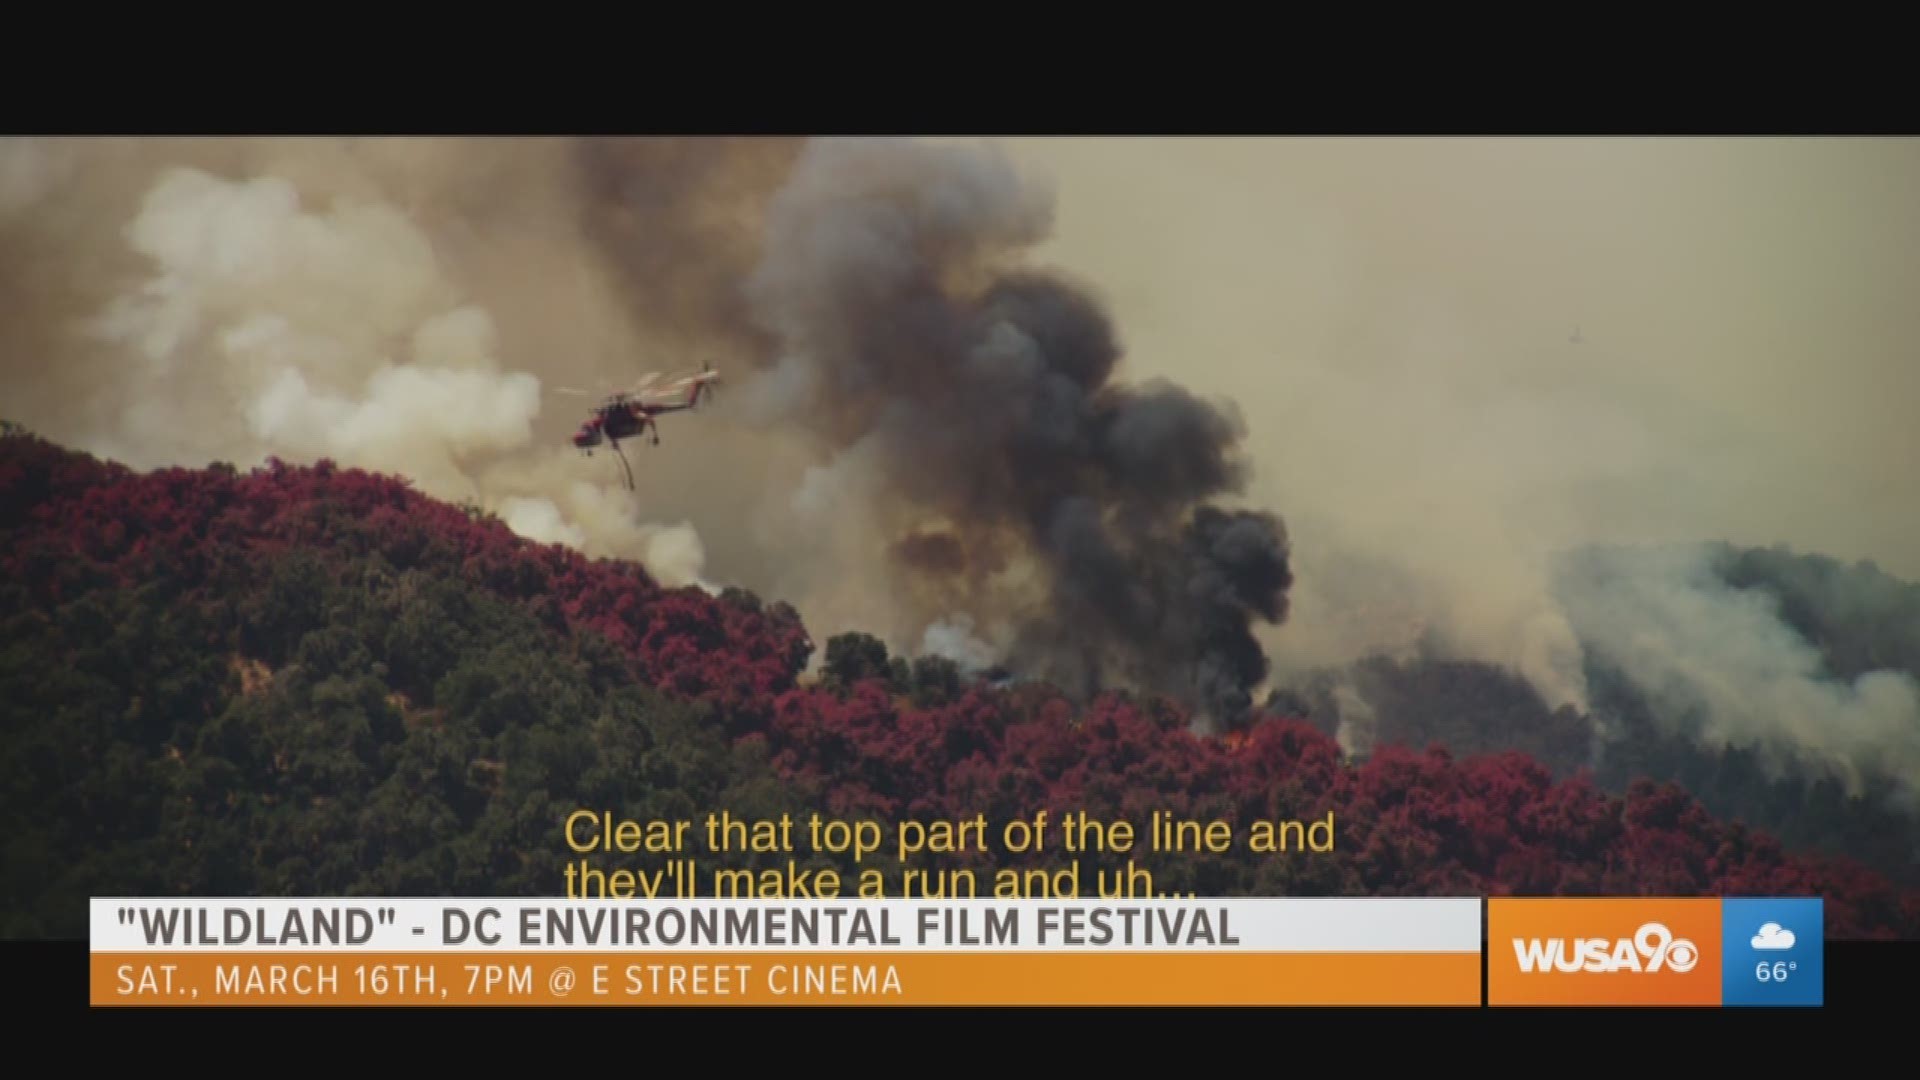 Alex Jablonski, director of the documentary, "Wildland”,  talks about the lasting effects the California wildfires have had on the community and the lives of the firefighters. The film is featured in the Environmental Film Festival March 14-24th, 2019.